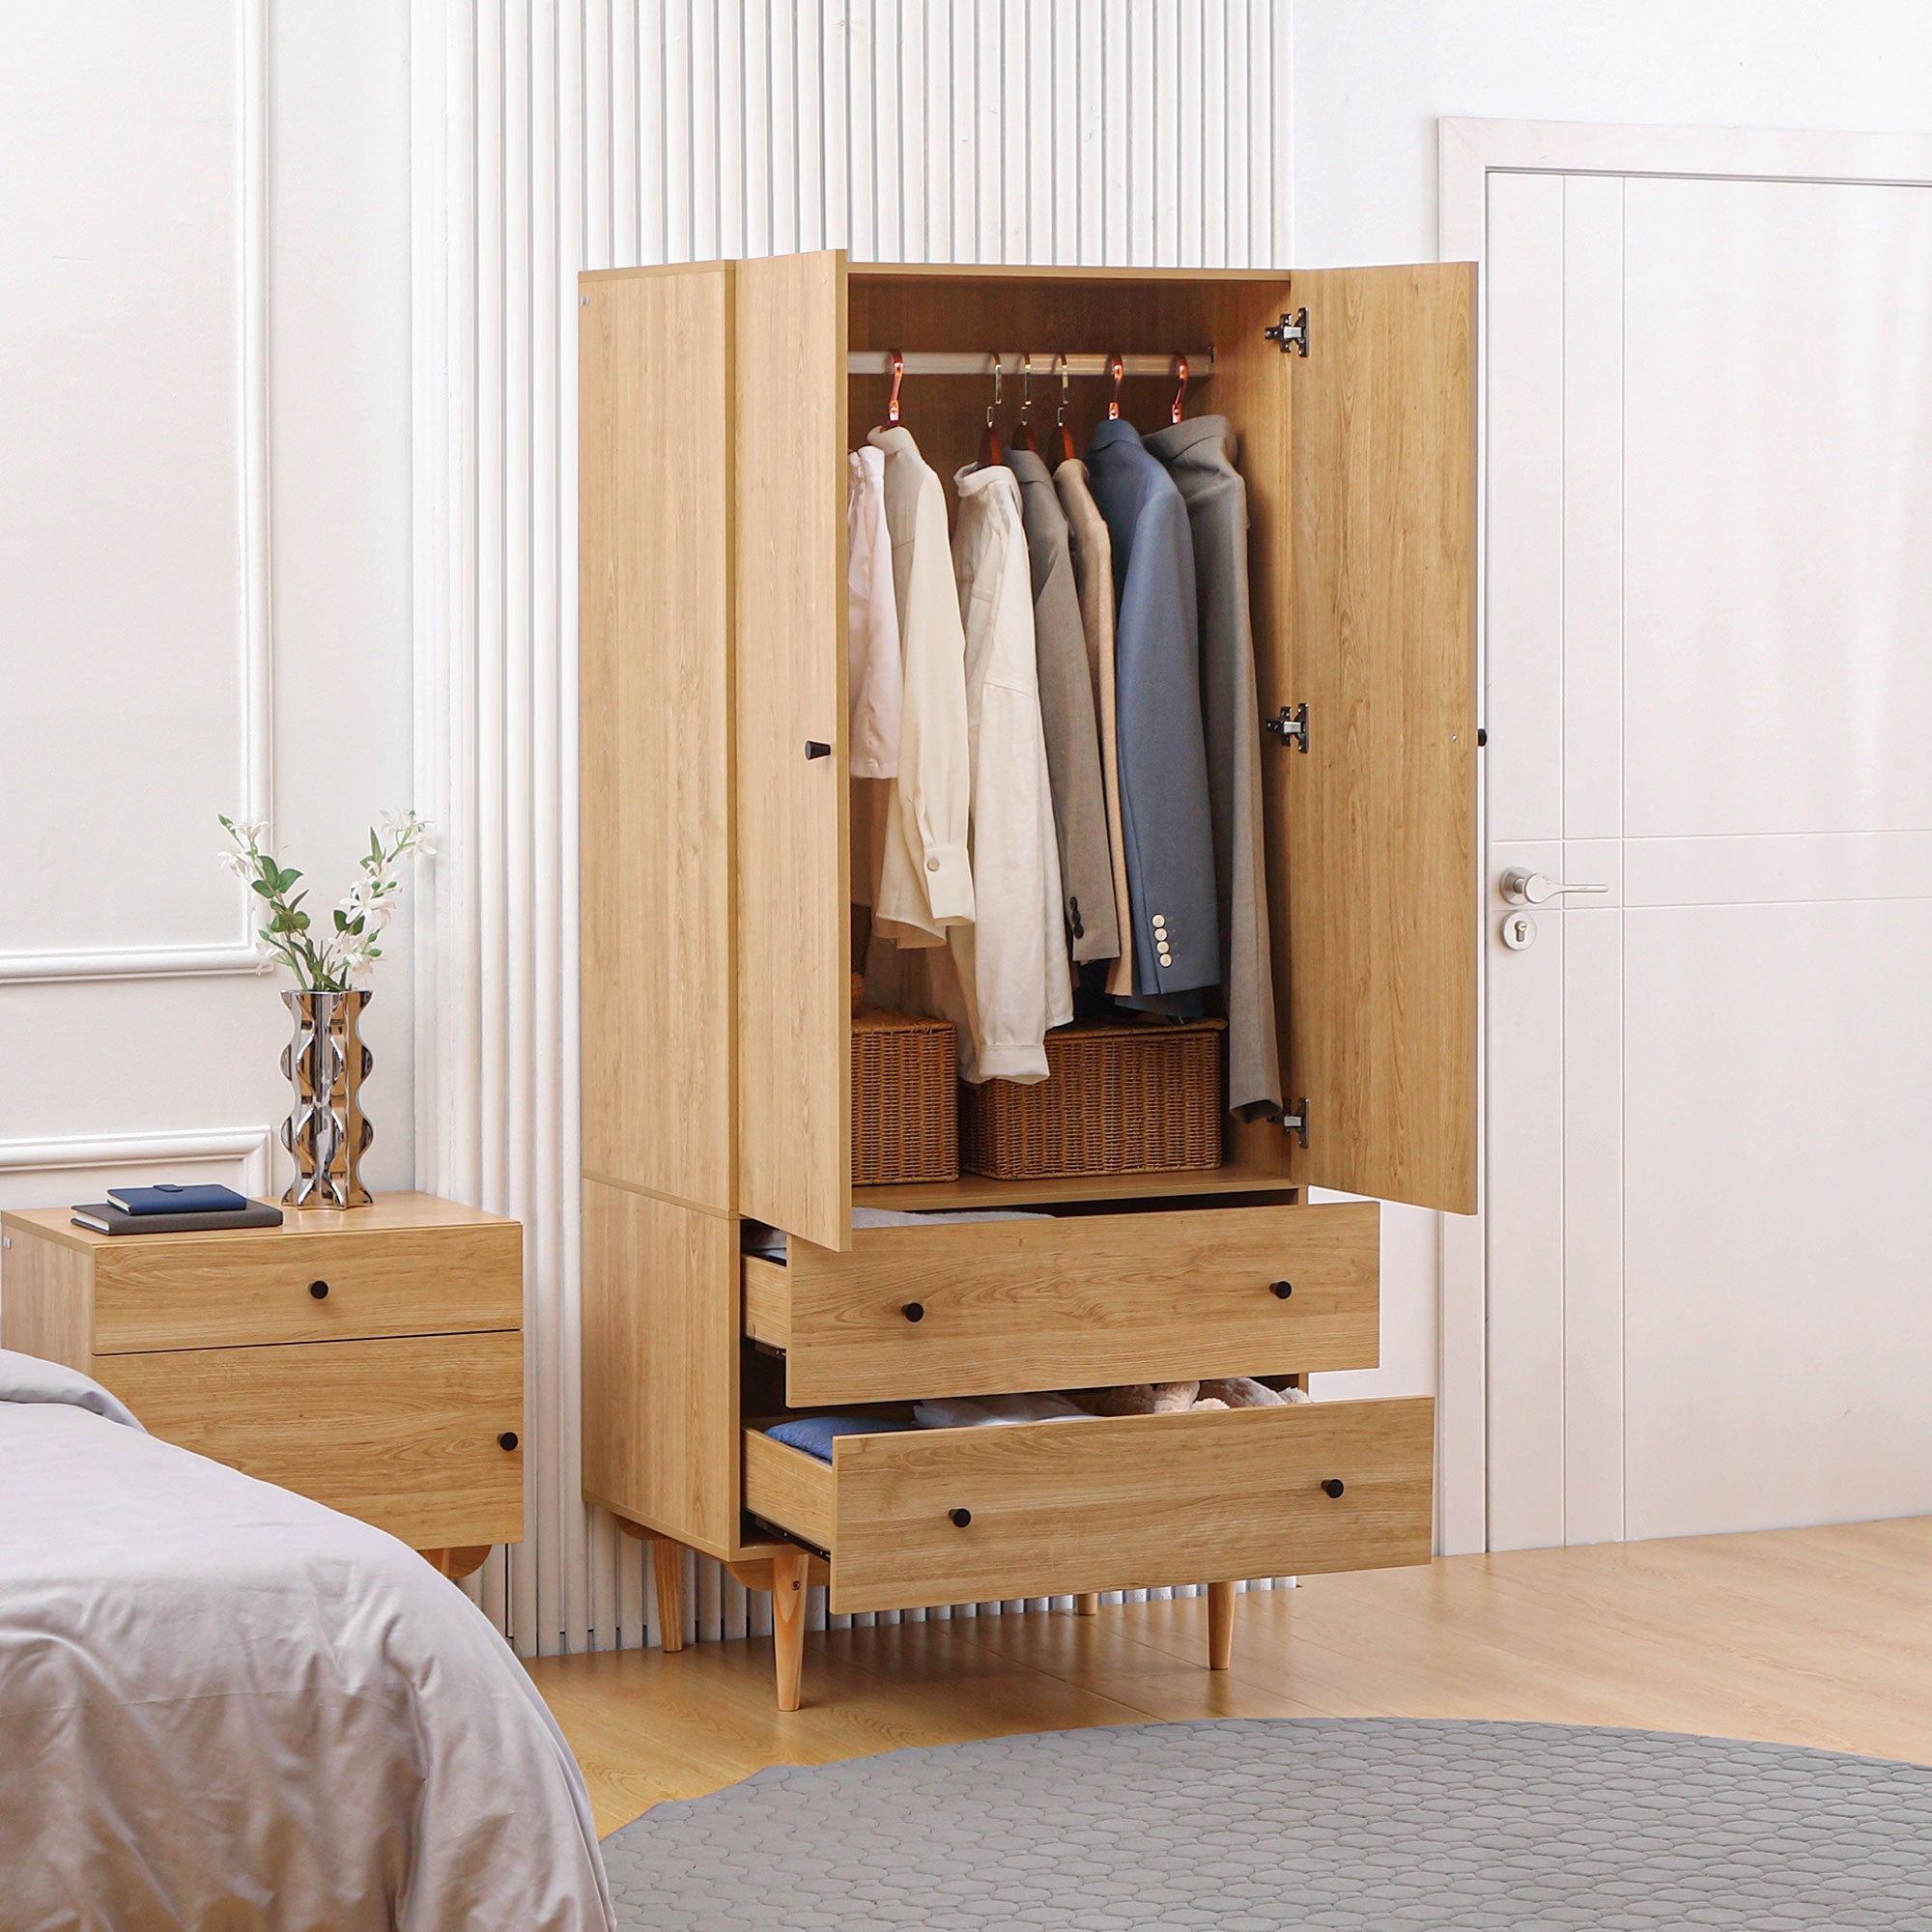 Wardrobe with 2 Doors, 2 Drawers, Hanging Rail for Bedroom Clothes Storage Organiser, 80x52x180cm, Natural Tone-1